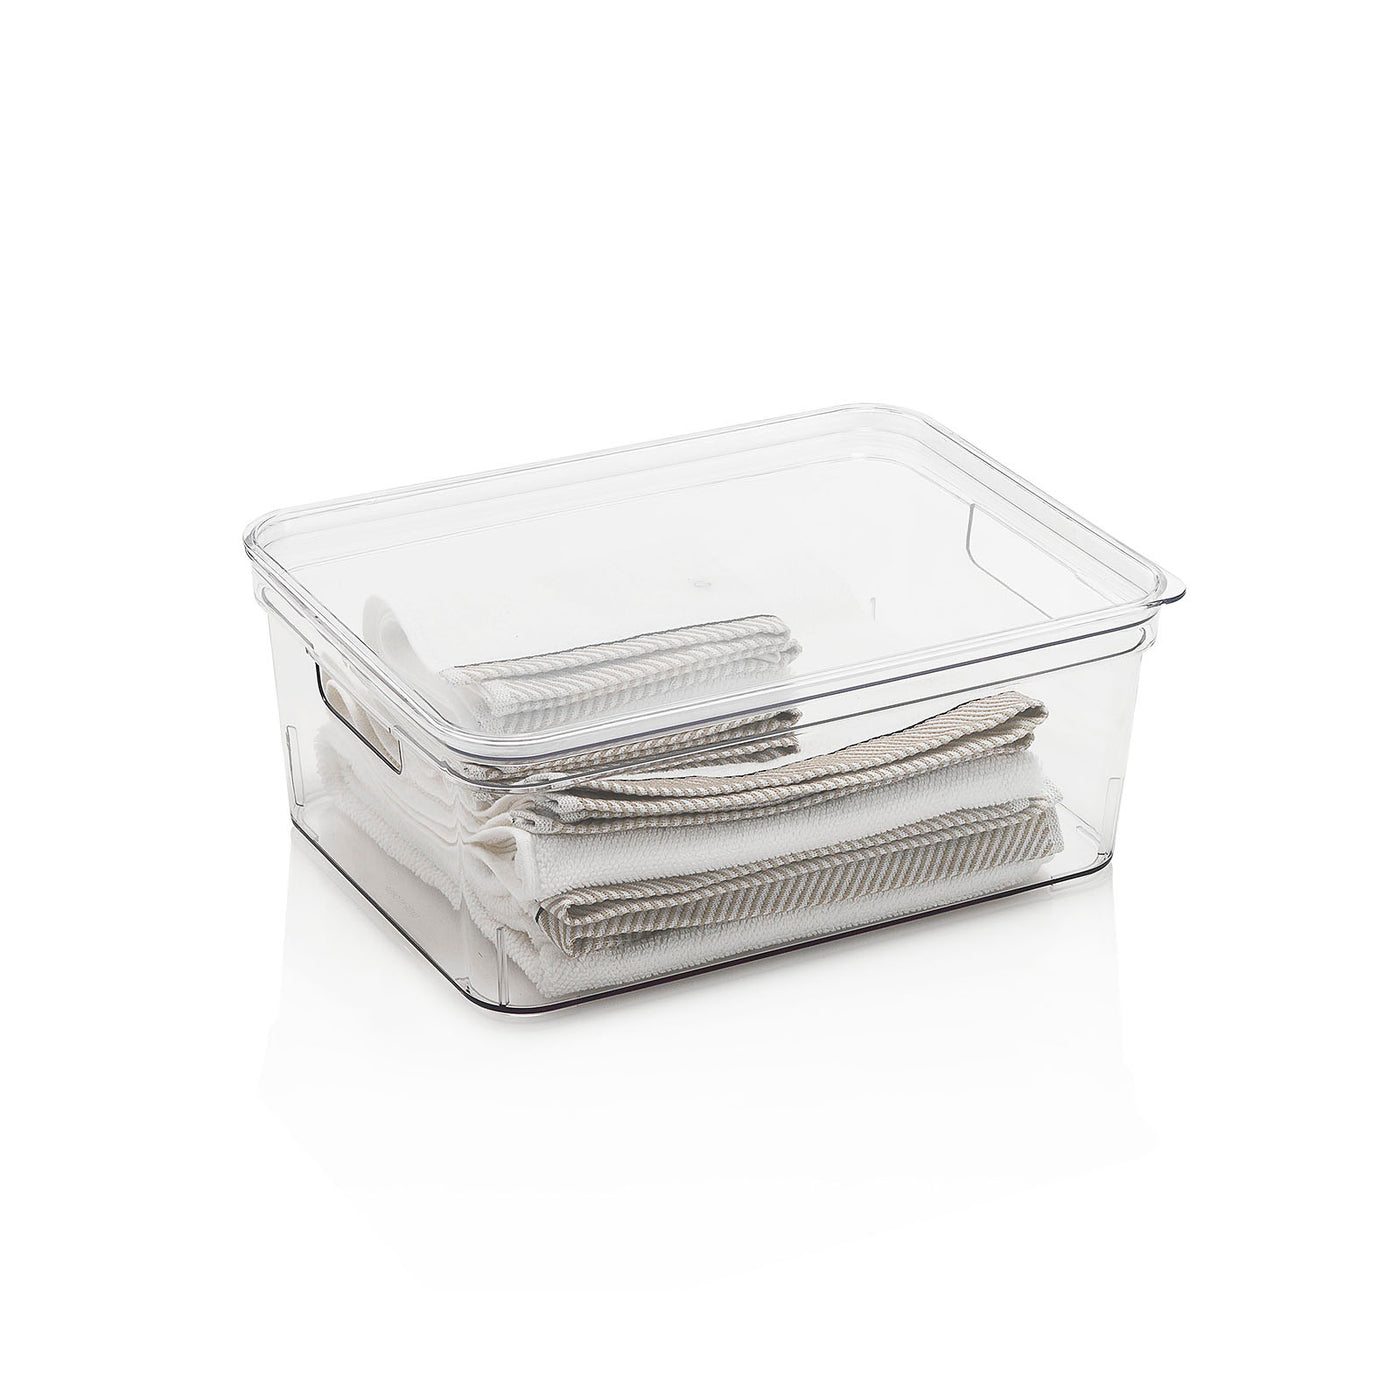 YAMBI-B container with lid